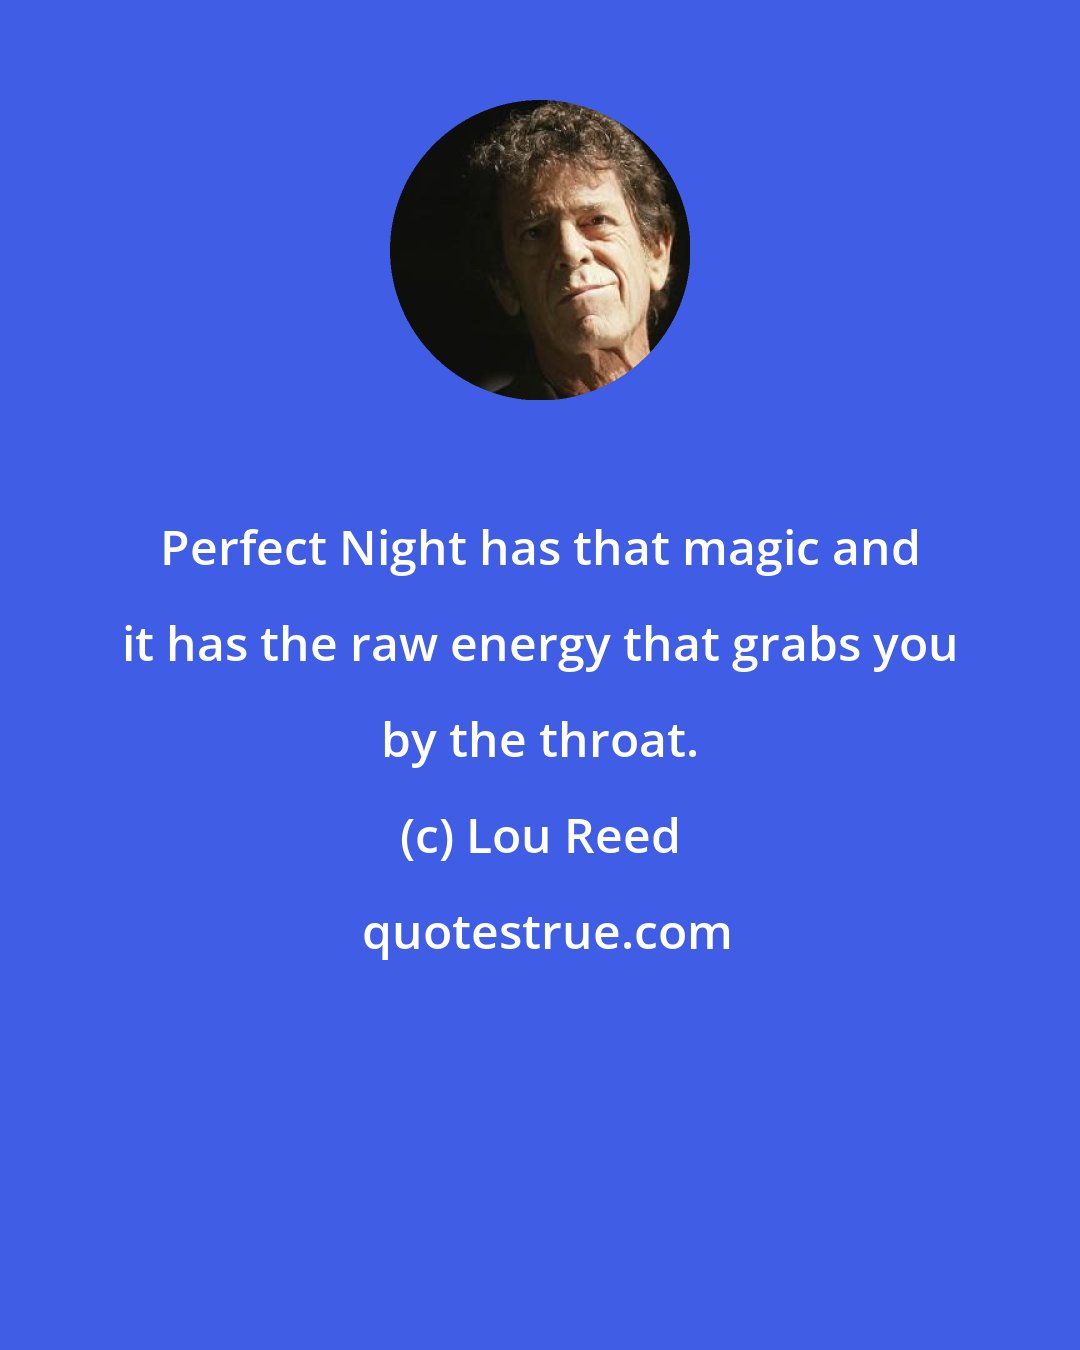 Lou Reed: Perfect Night has that magic and it has the raw energy that grabs you by the throat.